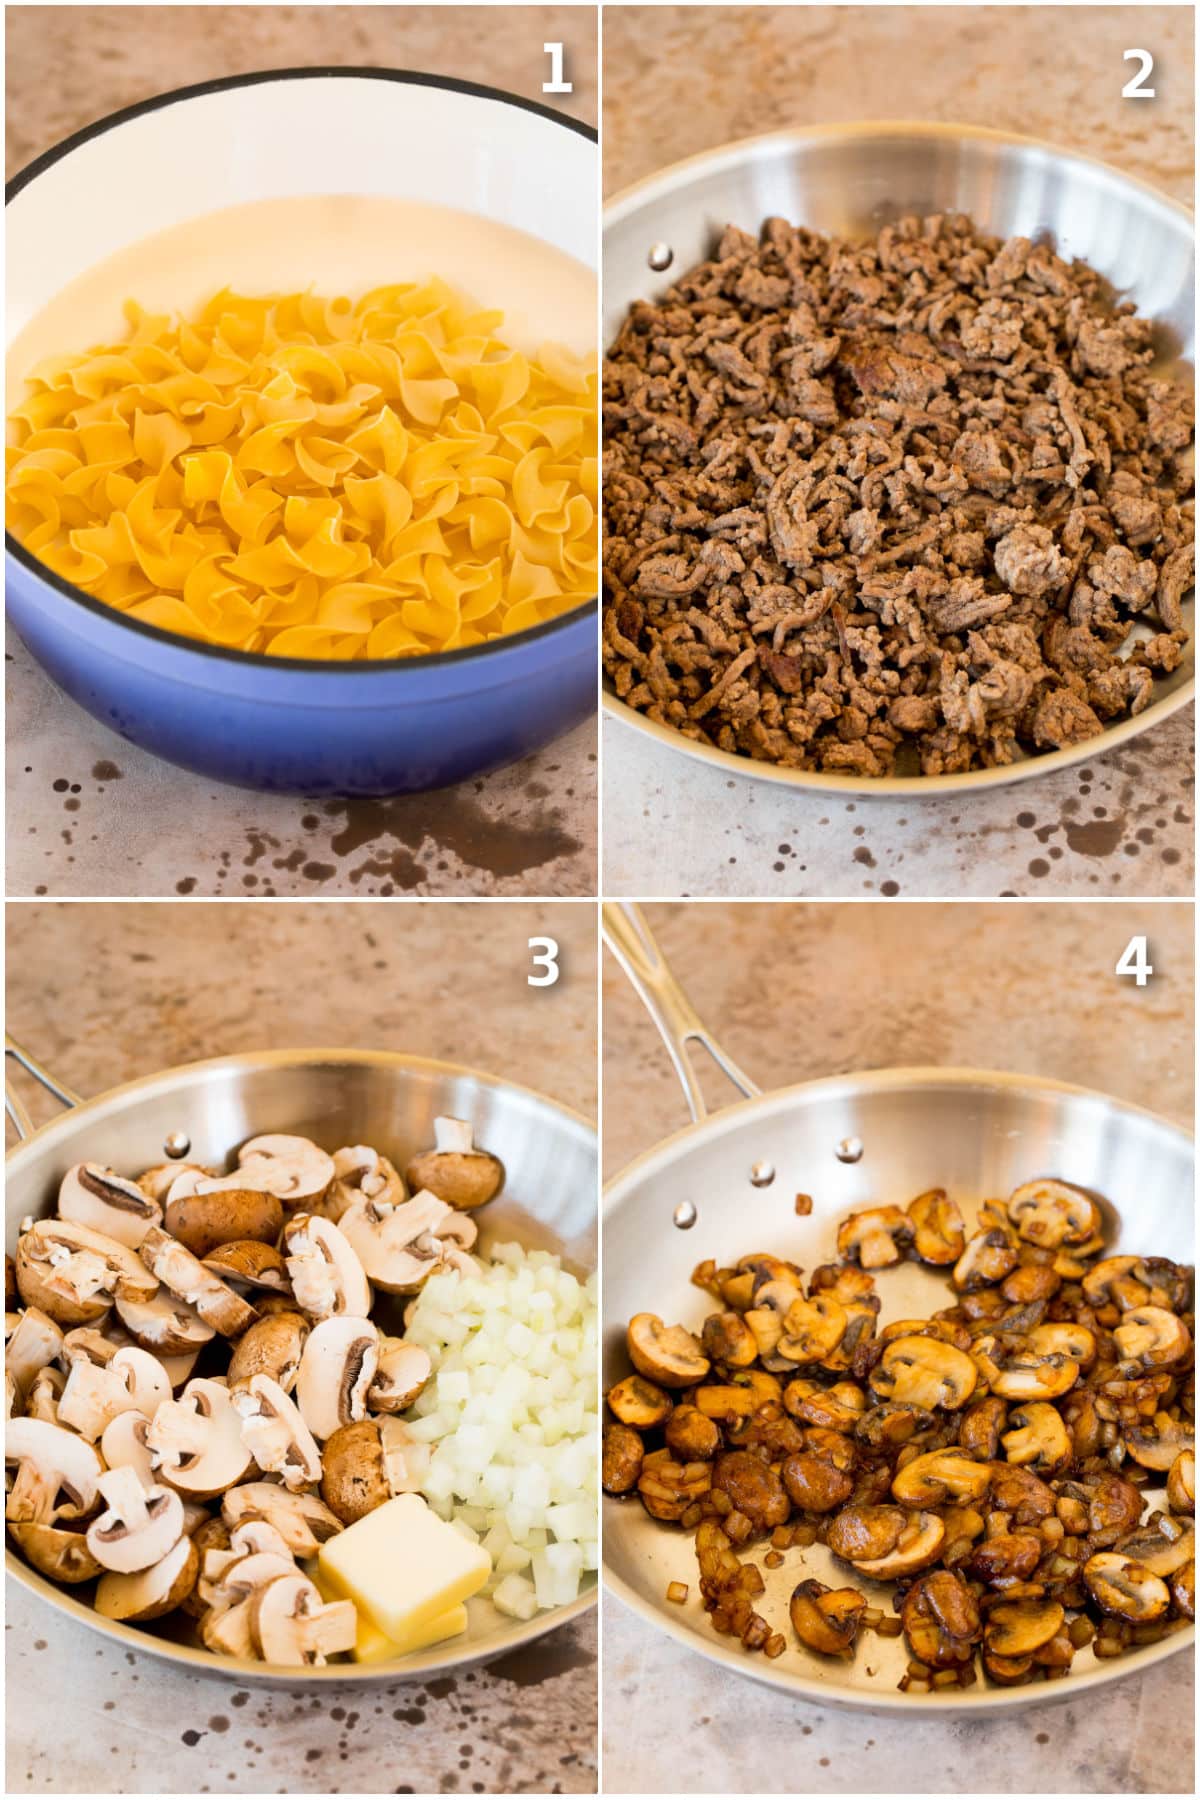 Step by step shots showing how to cook noodles and brown beef and mushrooms.